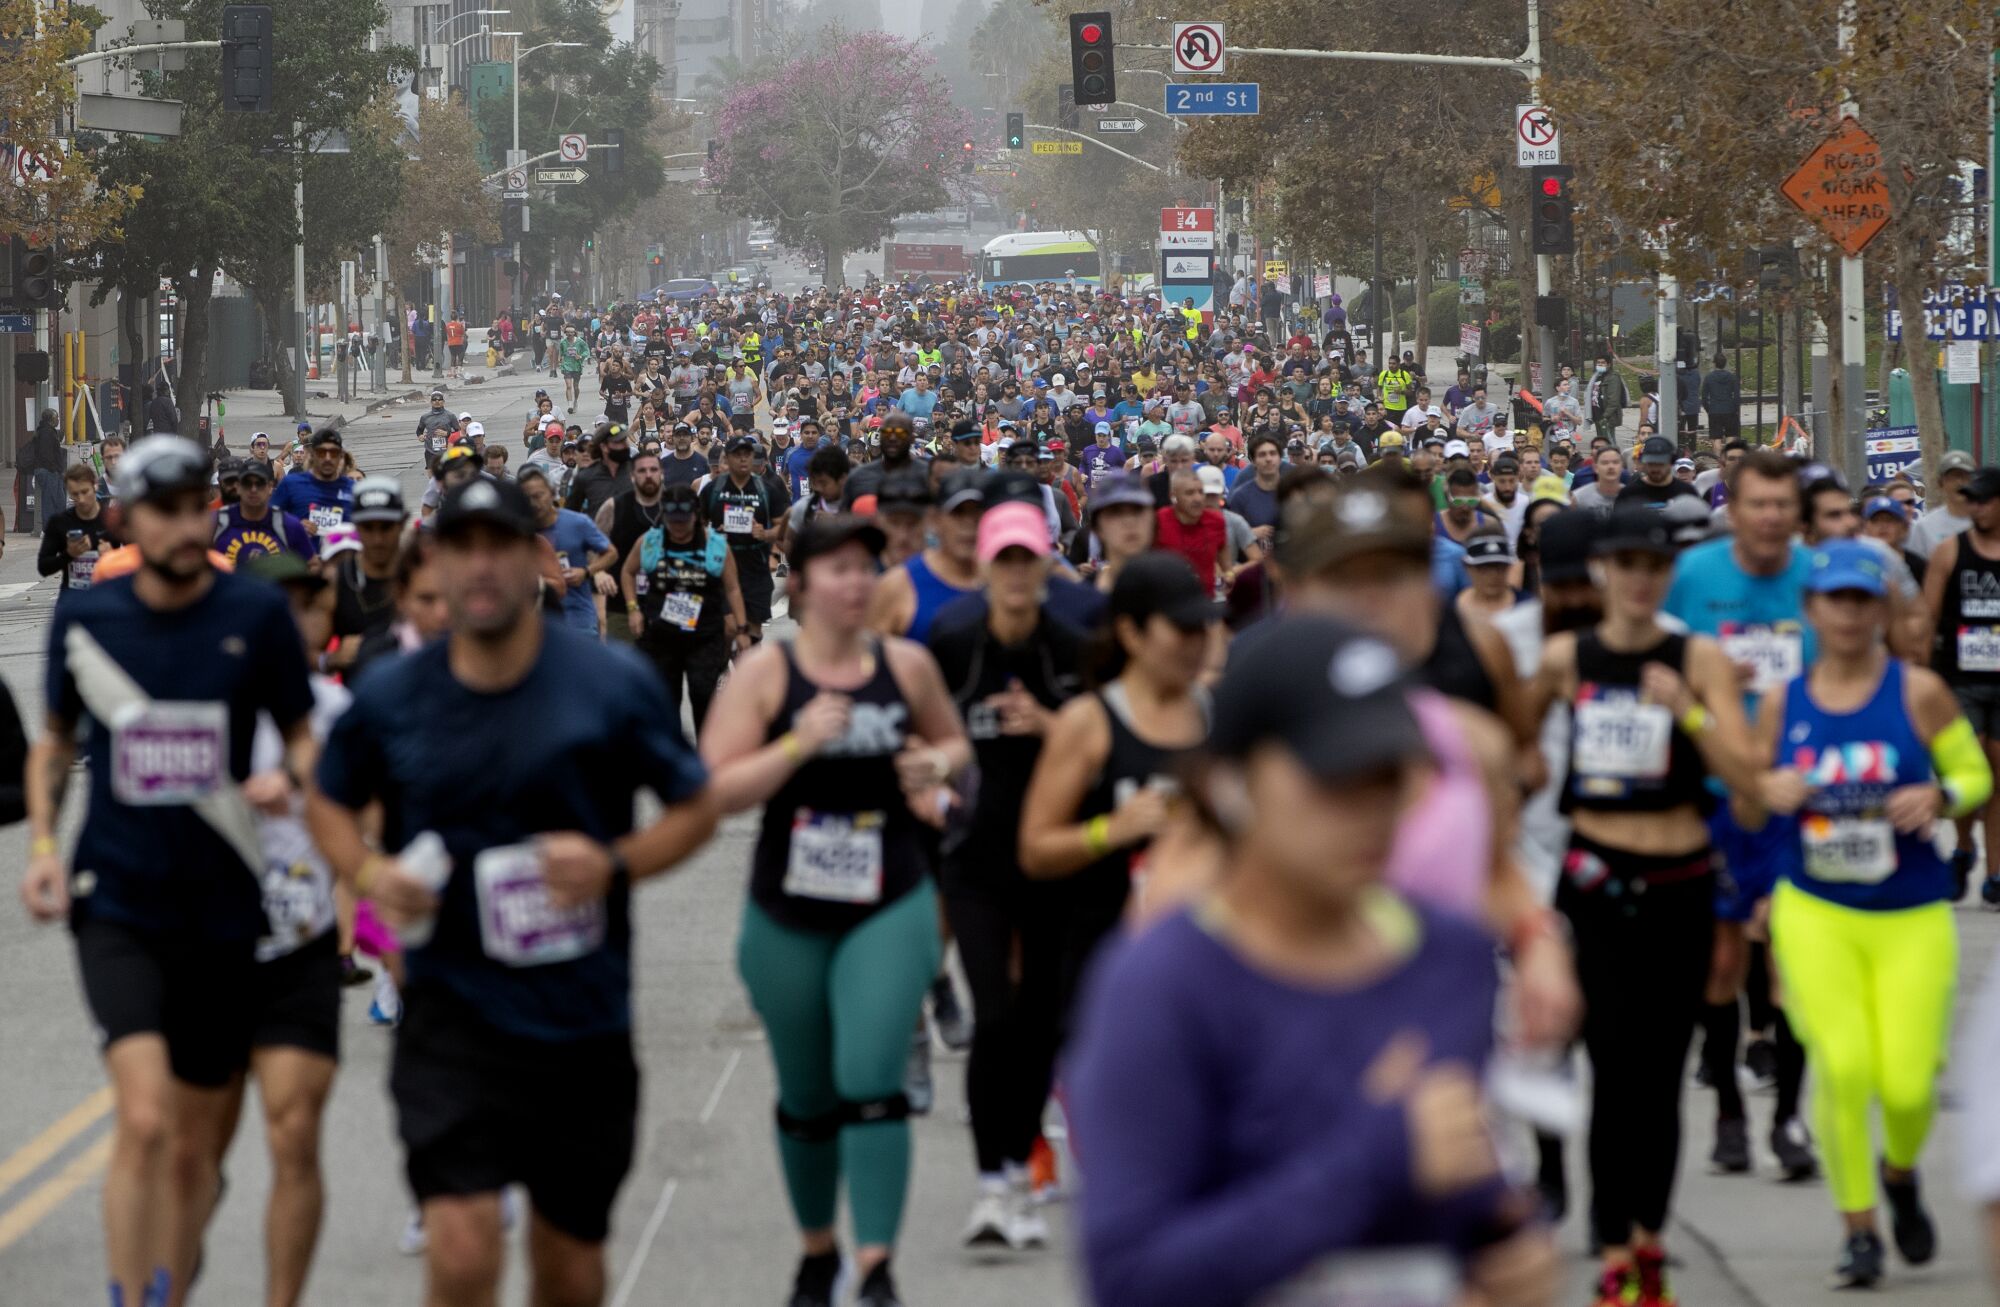 Thousands of runners fill the downtown streets during the L.A. Marathon